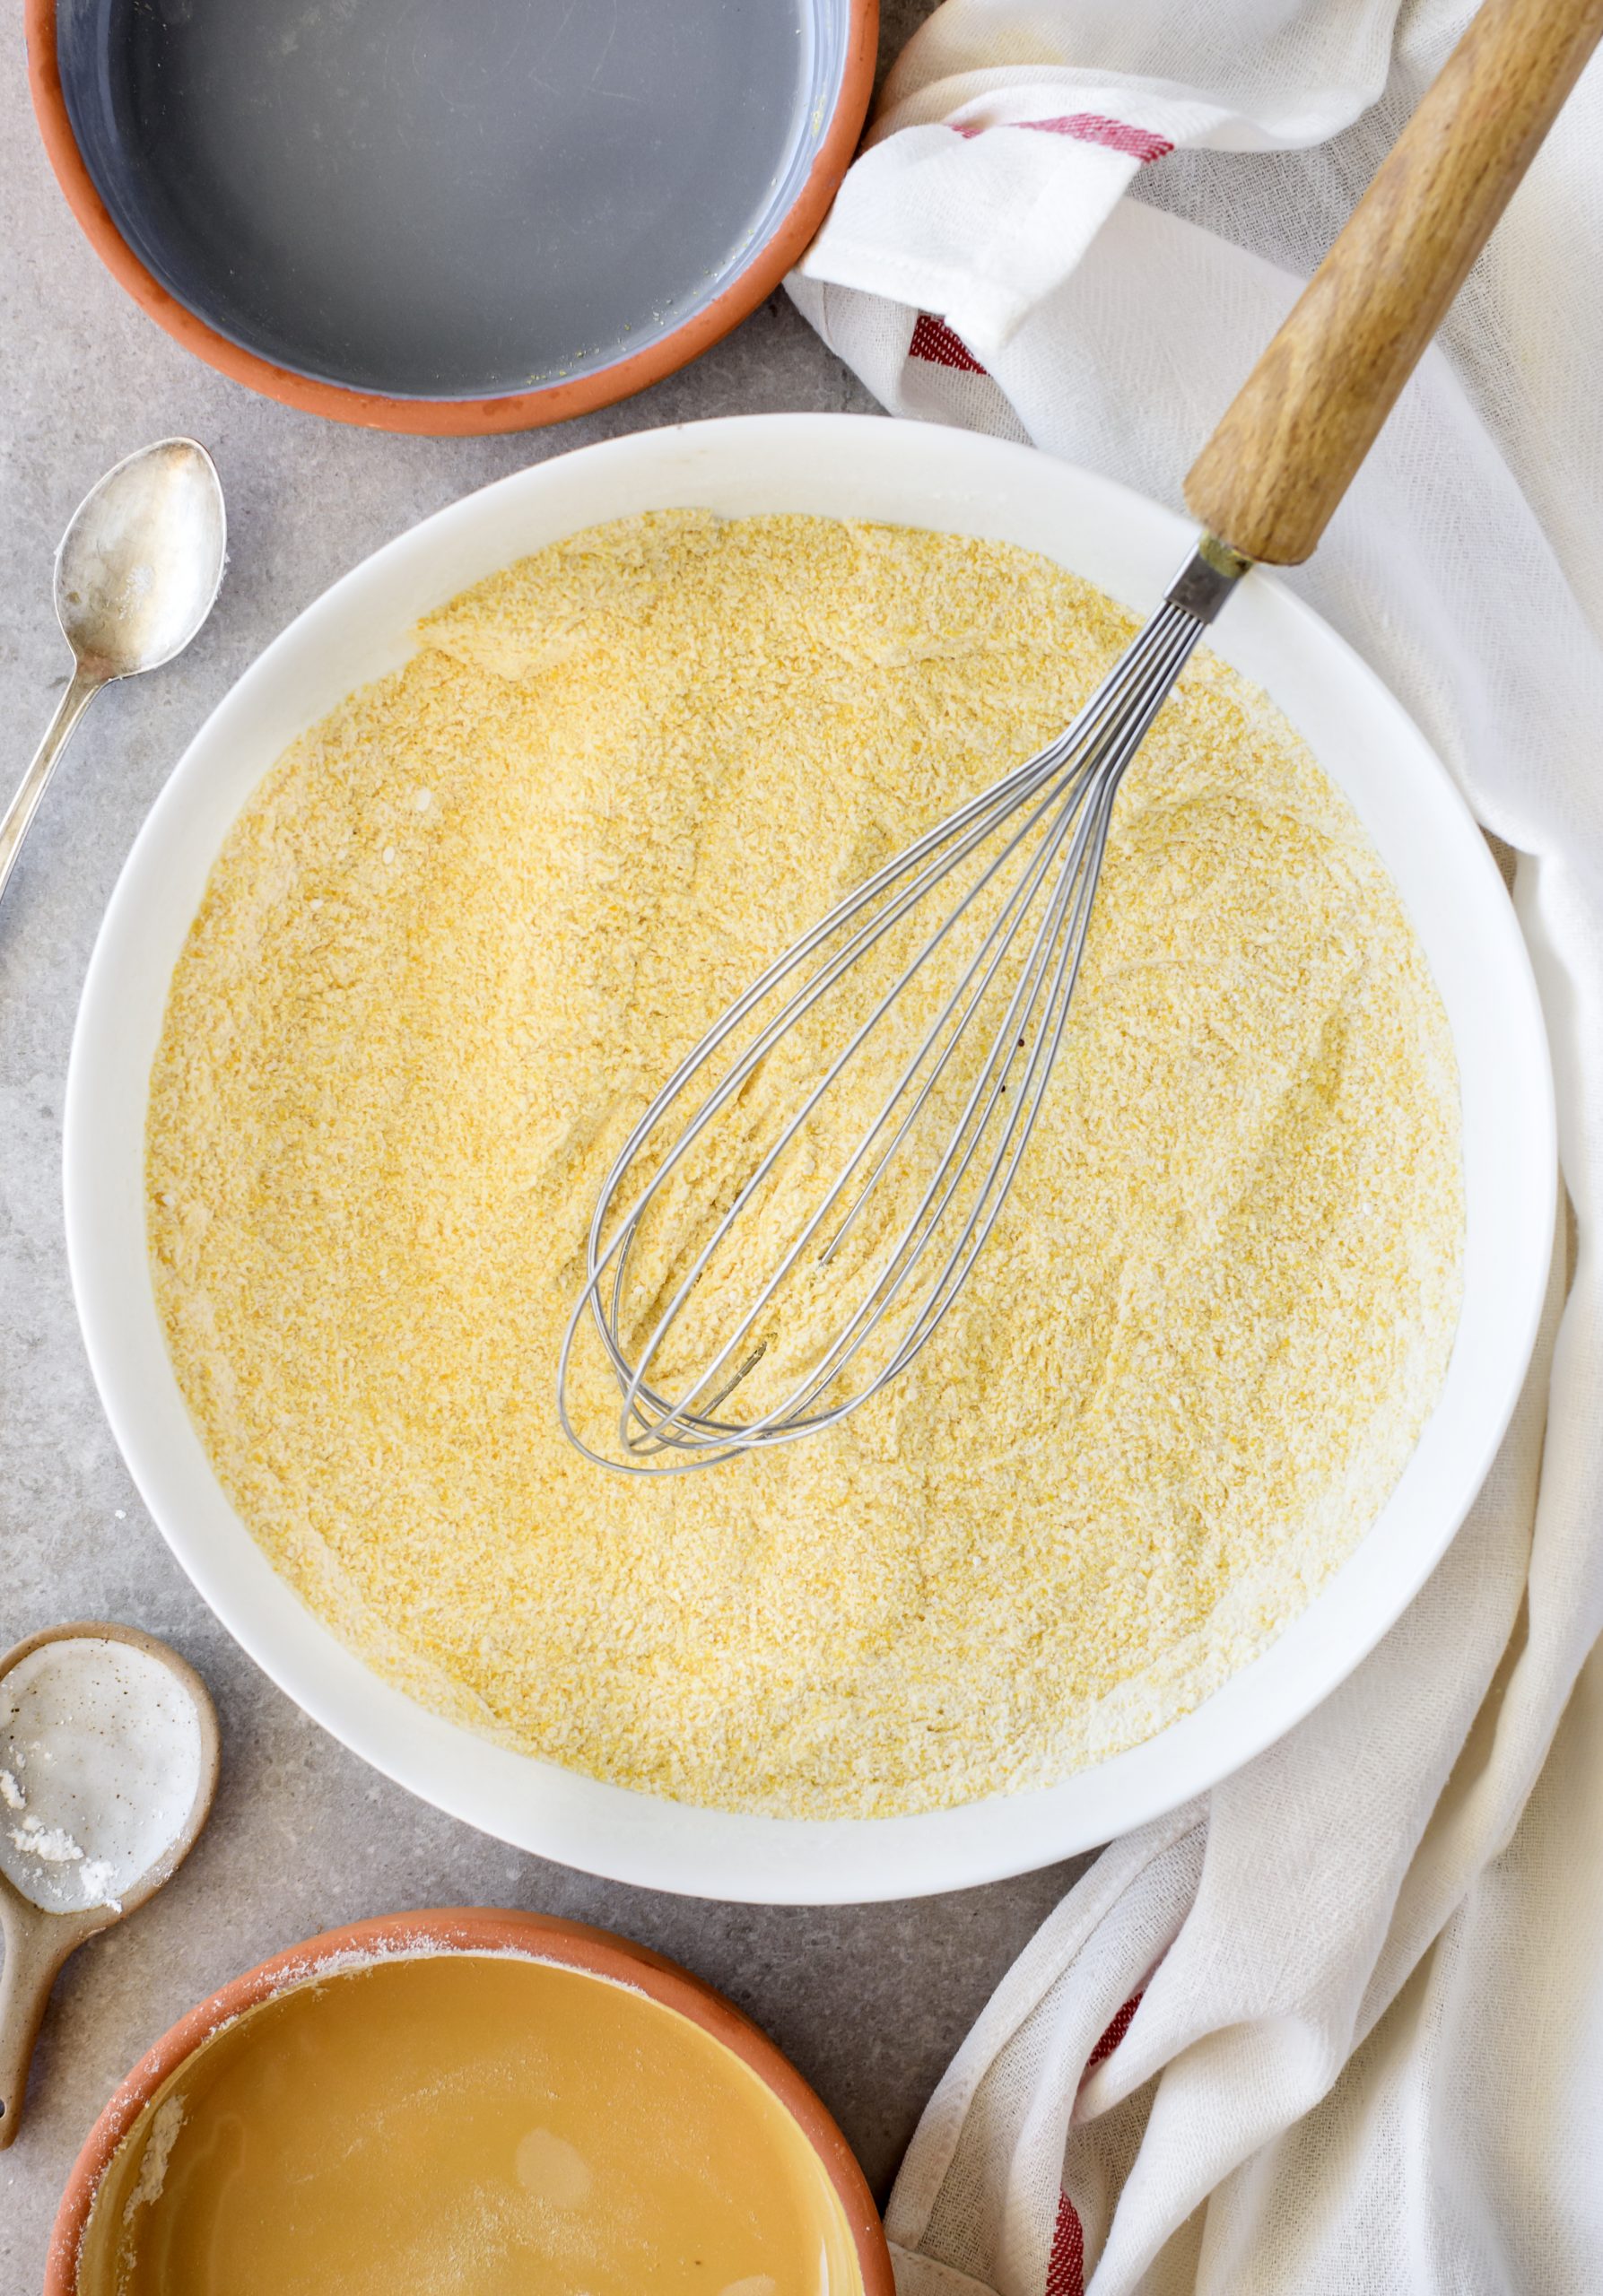 Mix together the sugar, flour, salt, baking powder, and cornmeal in a large bowl. 